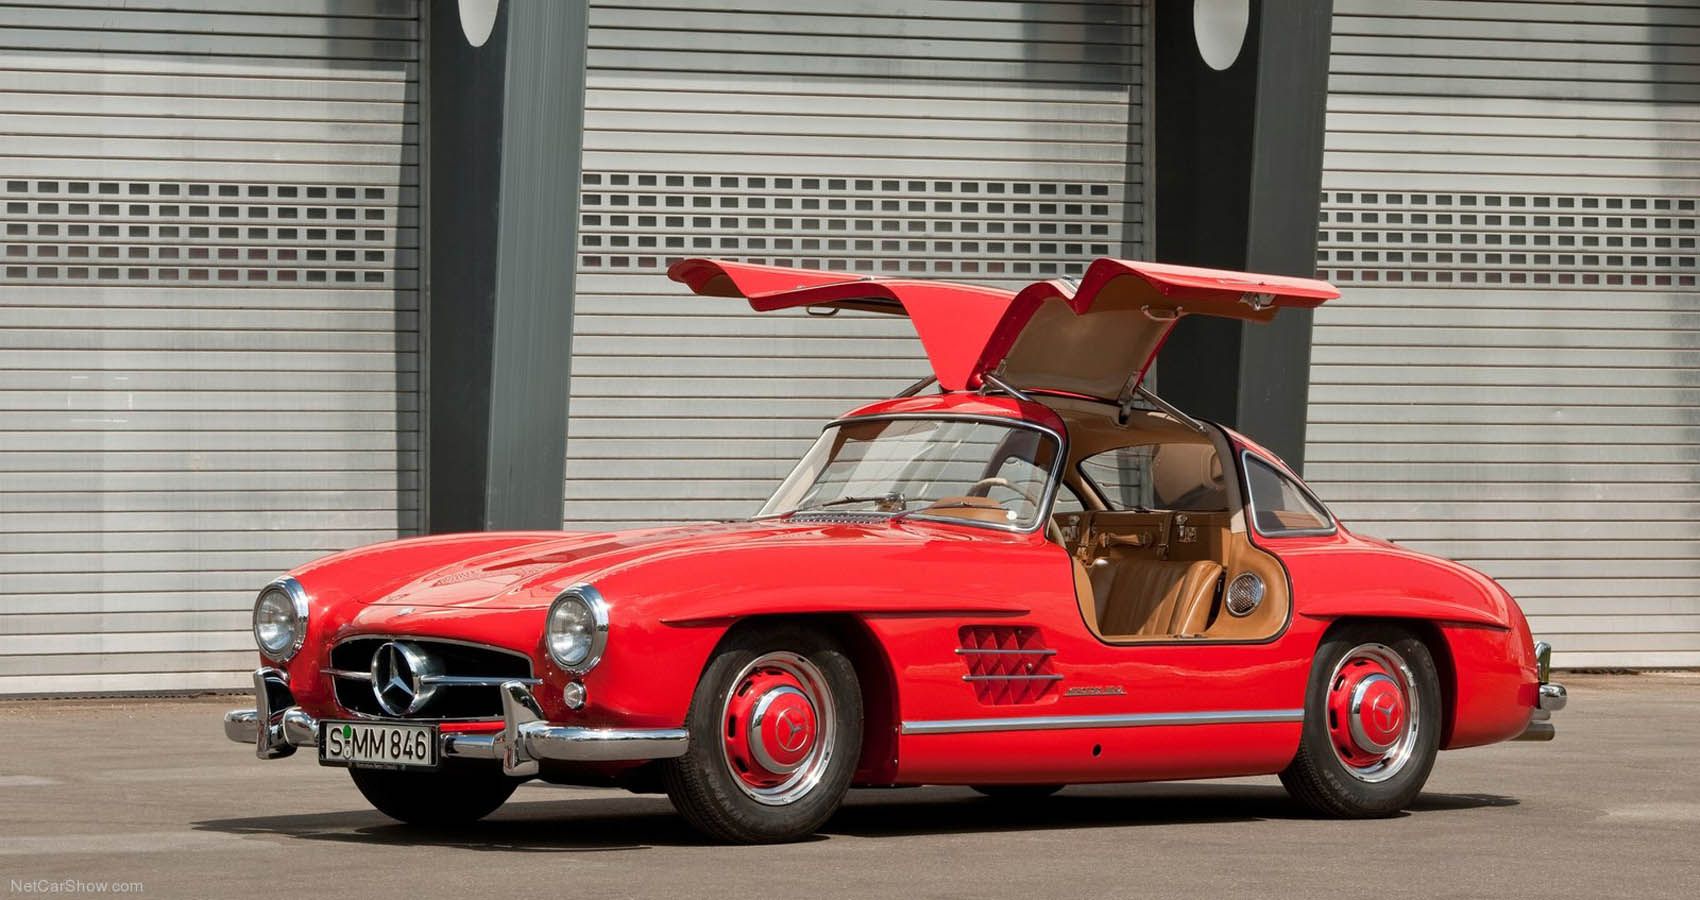 1954 Mercedes-Benz 300 SL Gullwing Sports Car In Red Paint